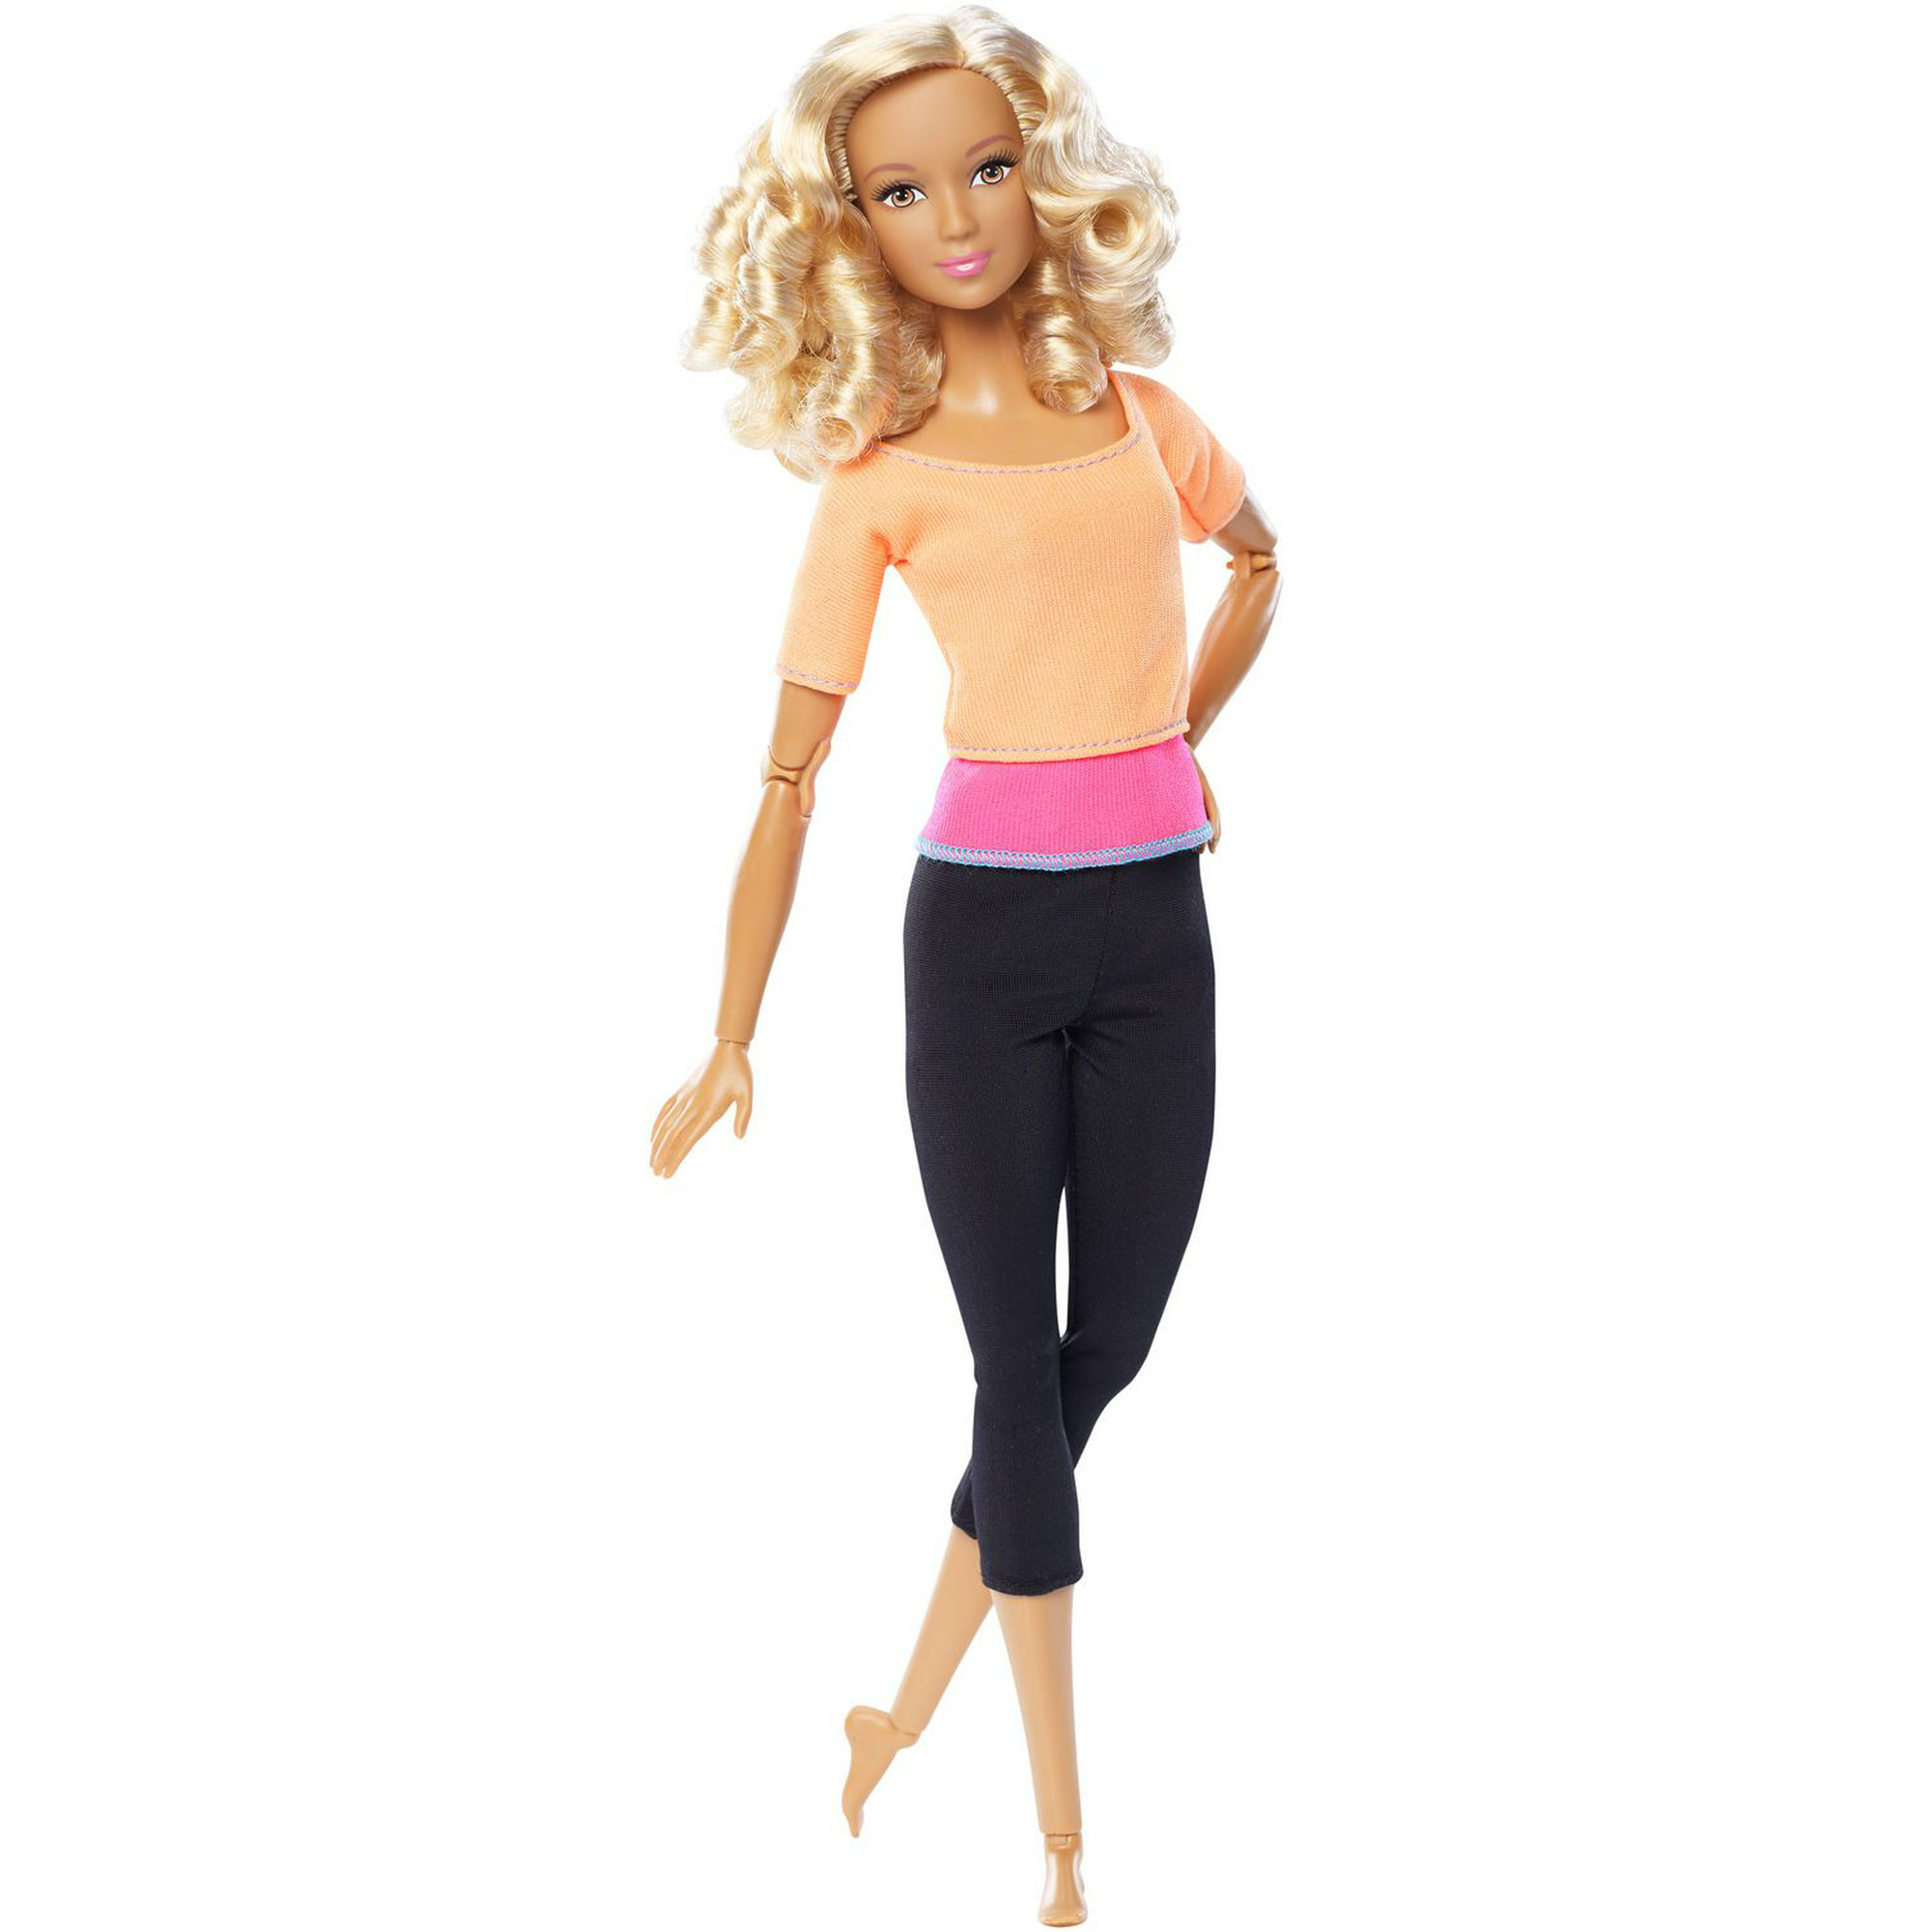 Original Barbie Made To Move Doll, Toy Yoga Dolls Blonde Flexible Endless  Movement Barbie Collector Toys